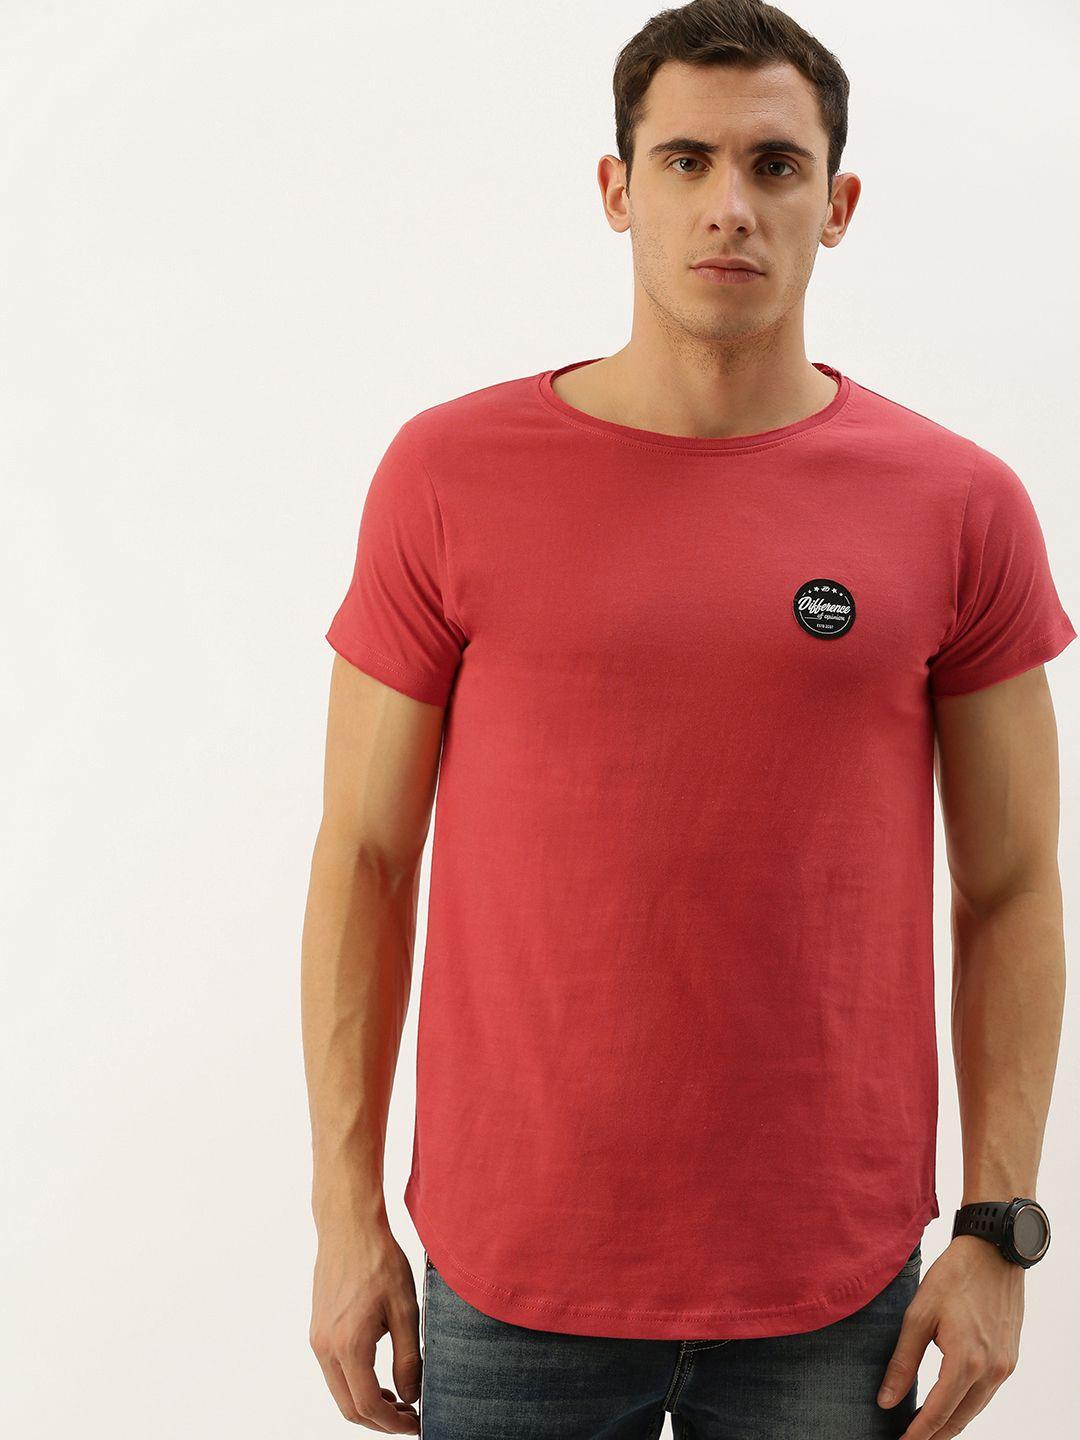 difference-of-opinion-men-red-solid-round-neck-pure-cotton-t-shirt